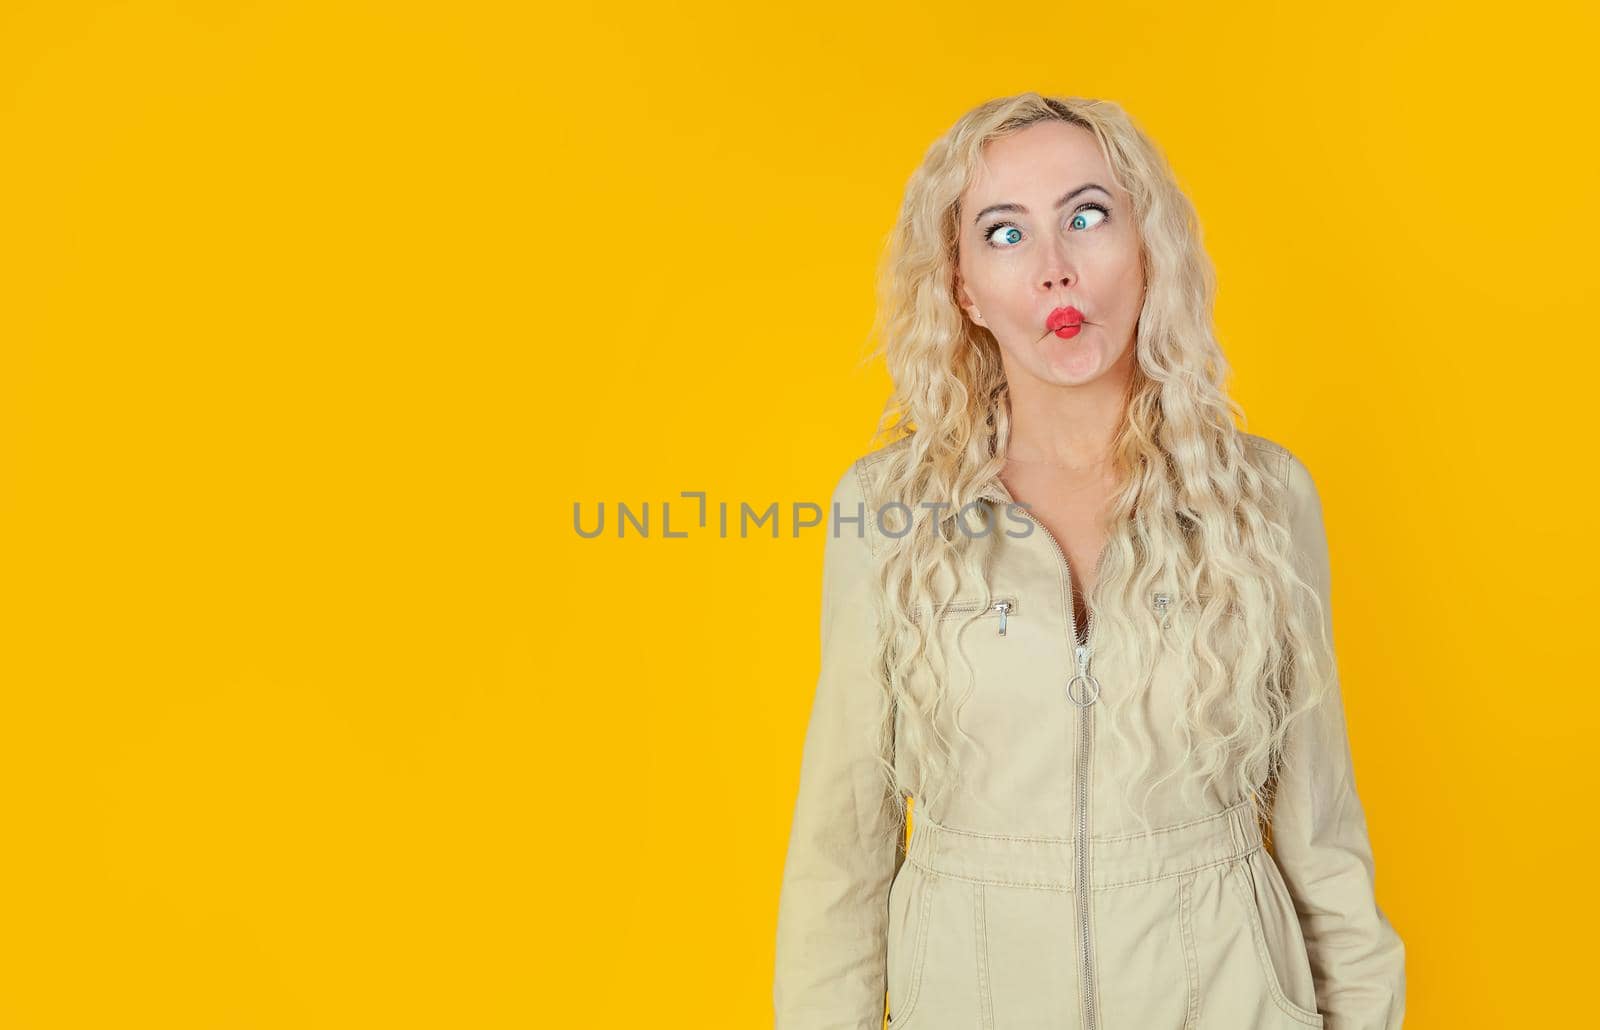 Amusing, playful cute woman, showing her cheerful side, playing charades, imitating fish, folding her lips and squinting, turning her eyes, standing on a yellow background, cheerfully grimacing